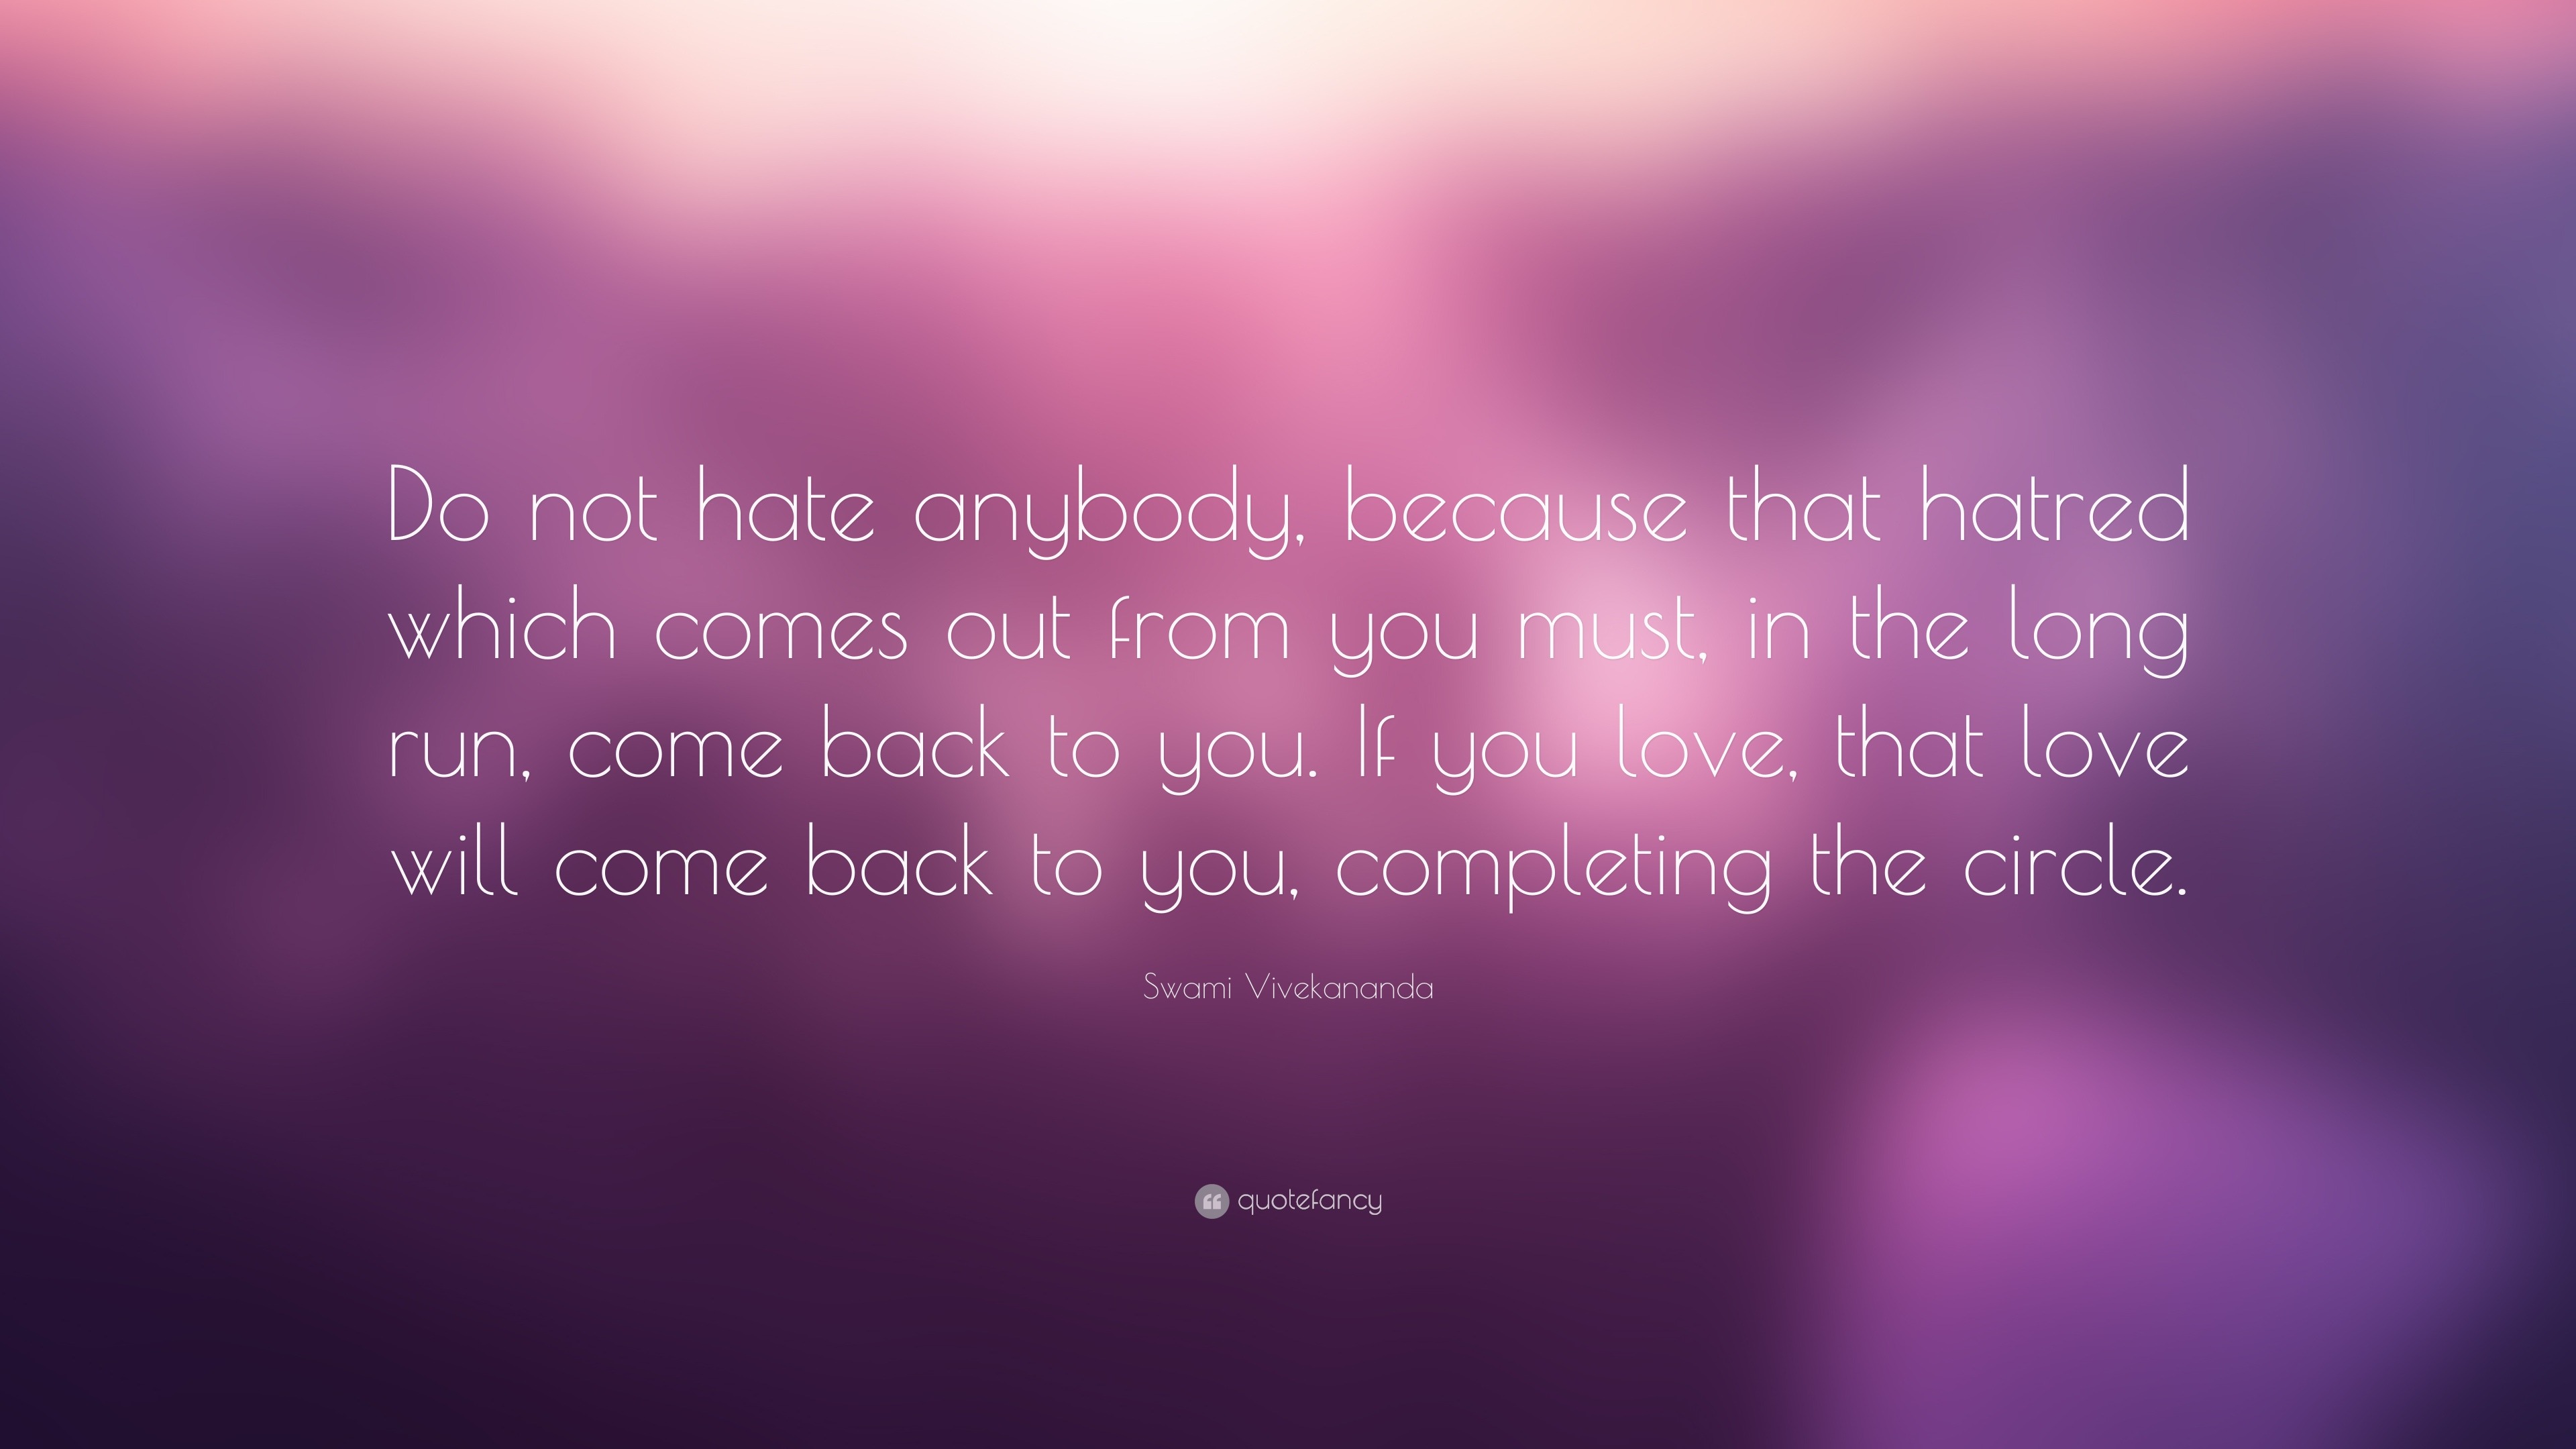 Swami Vivekananda Quote “Do not hate anybody because that hatred which es out